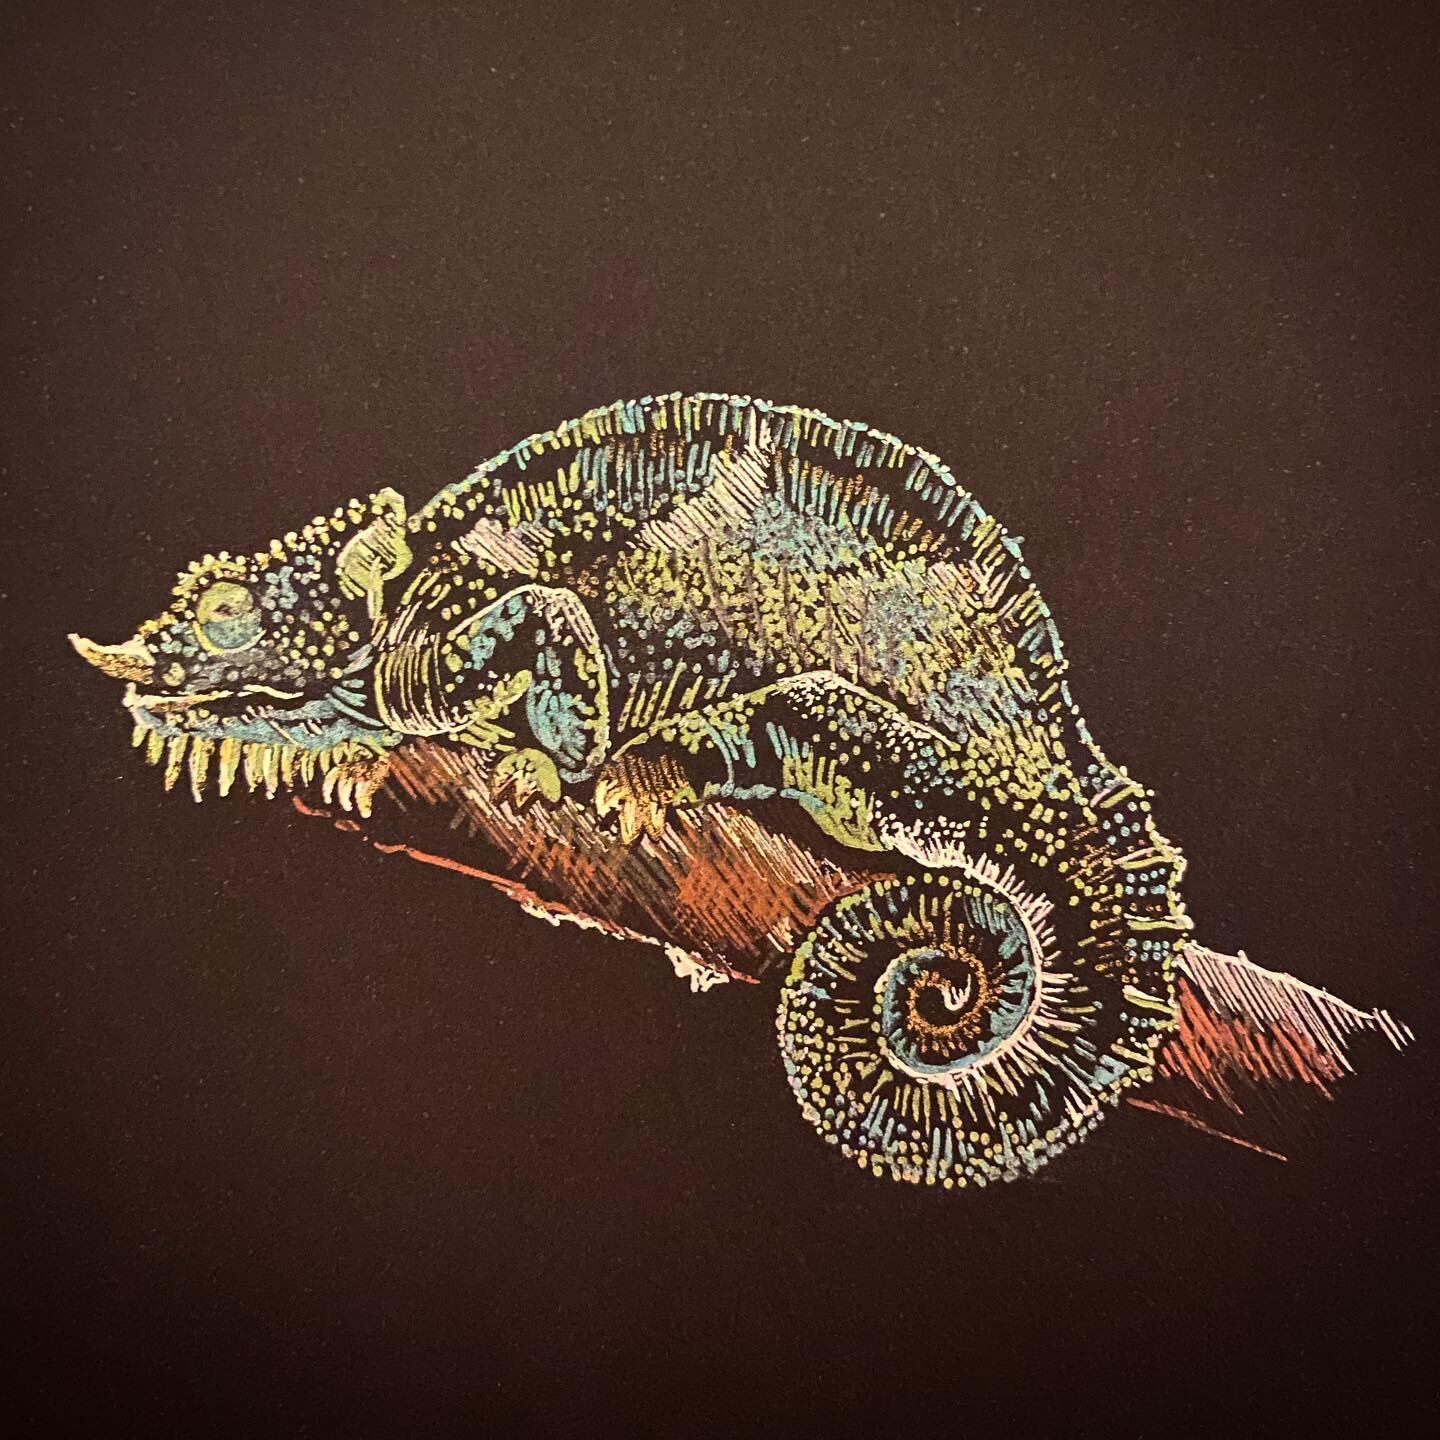 A #fourhornedchameleon from back in October (from a prompt from the @undyingtales project, celebrating endangered and vulnerable species and the myths surrounding them).
&bull;
#illustration #drawing #gelpens #gelpensonblackpaper #chameleon #undyingt